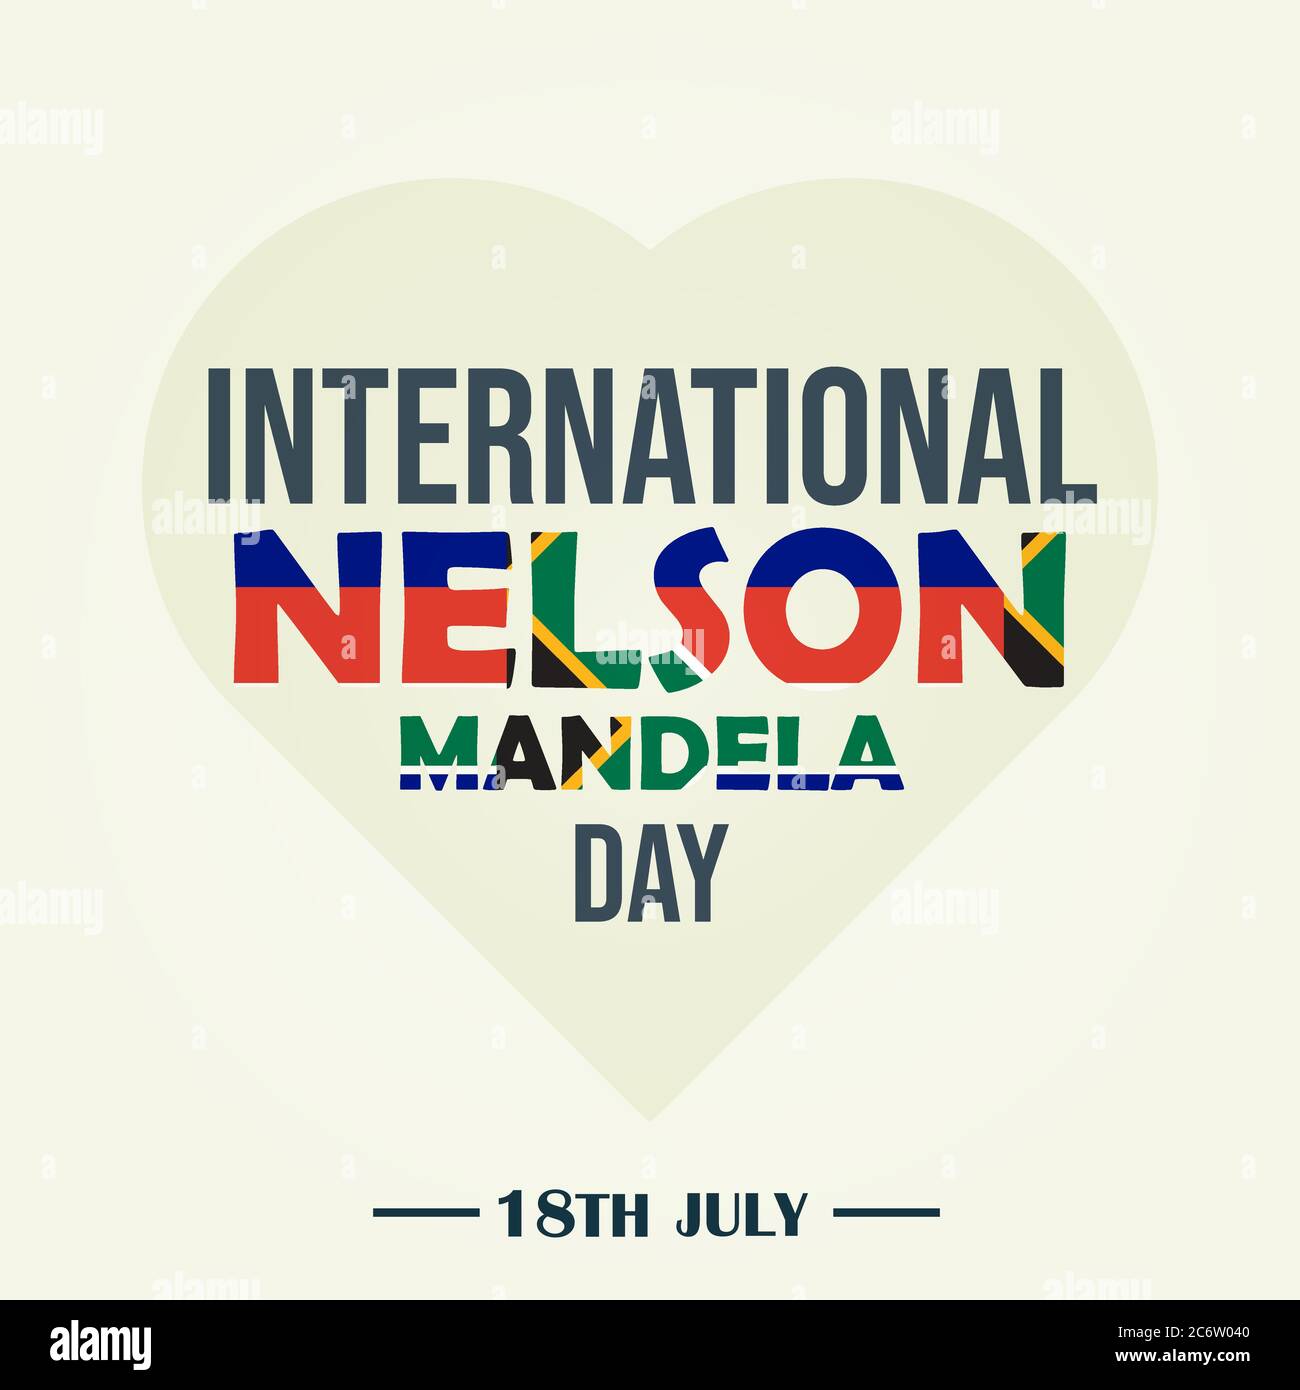 International Nelson Mandela Day, 18th July, heart with African flag text, poster illustration vector Stock Vector